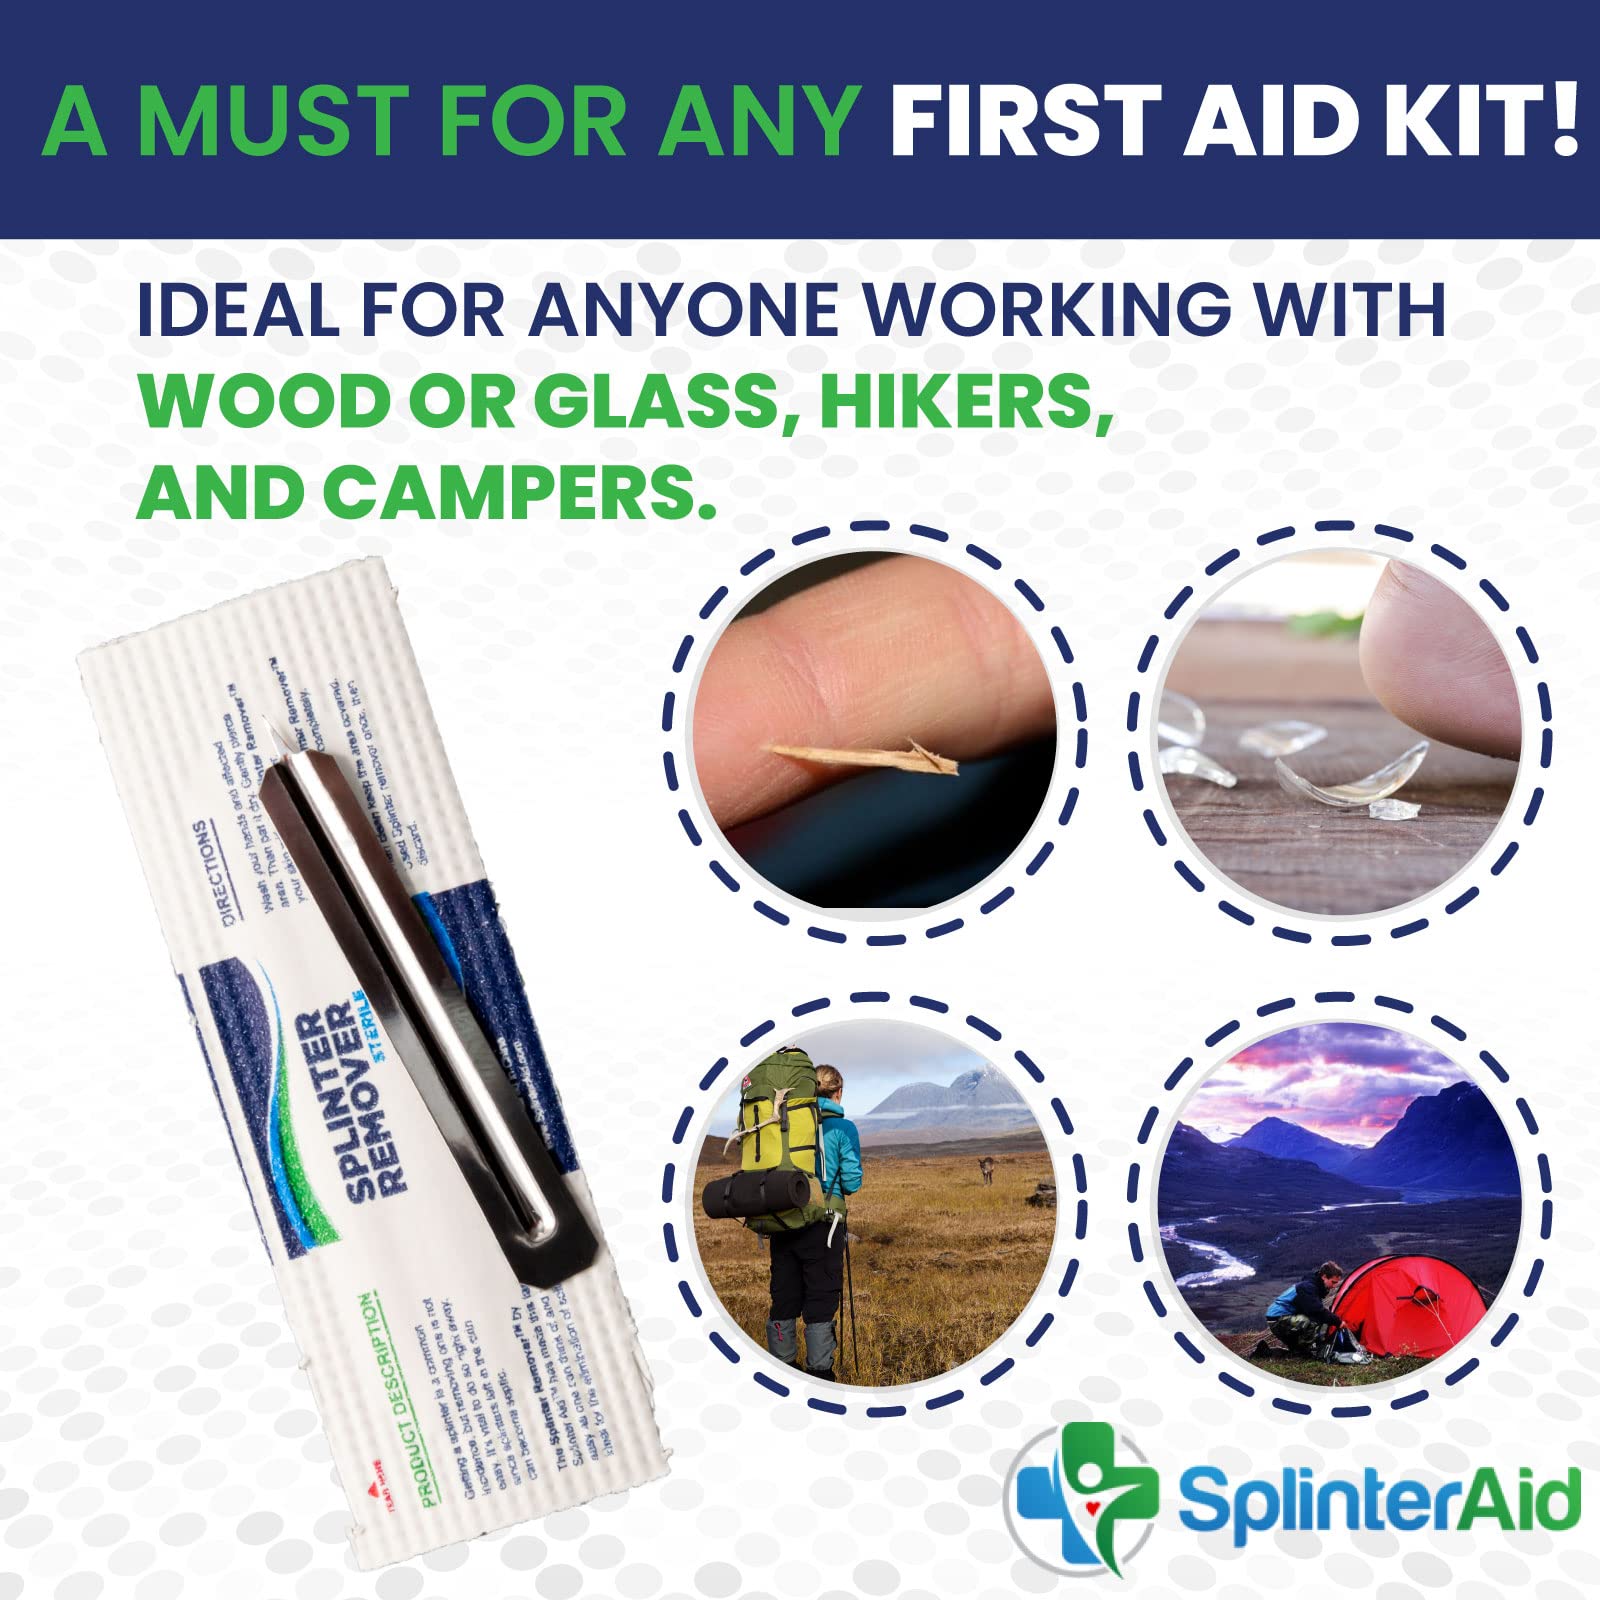 SplinterAid - Painless Splinter Removal Kit | Effortless Quick Splinter Out | Essential First Aid for Outdoors, Home, Travel | Ideal for Camping, Hiking, Woodworking, DIY Supplies | No Tweezers